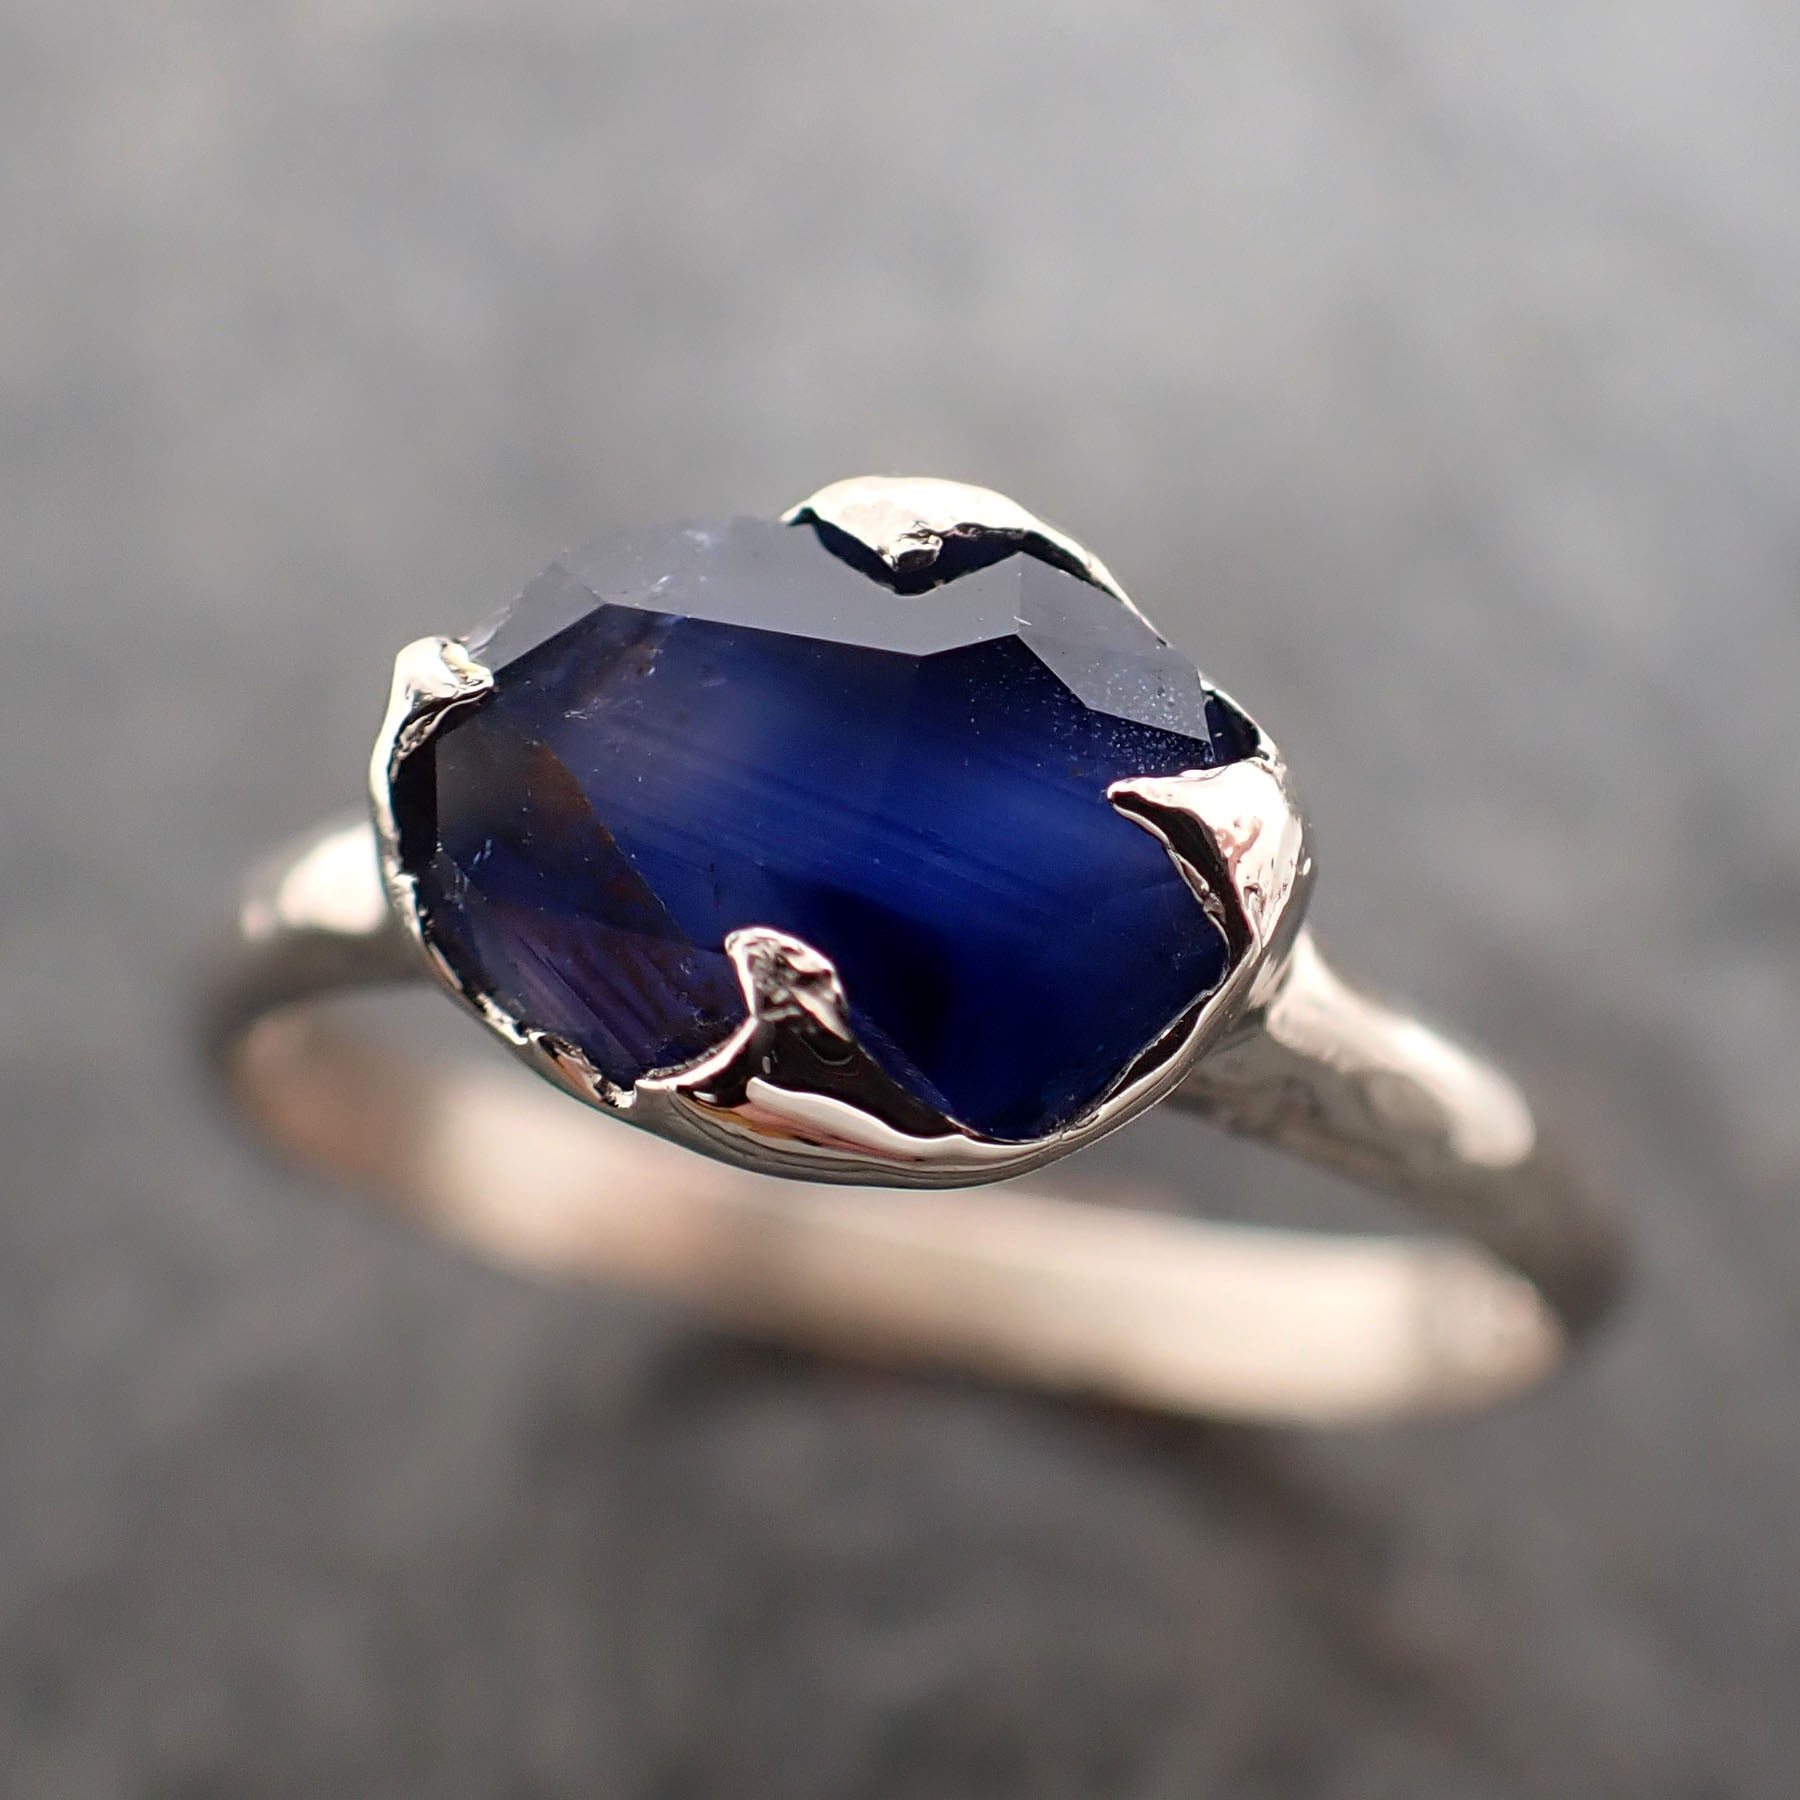 Partially Faceted blue Sapphire Solitaire 18k white Gold Engagement Ring Wedding Ring Custom One Of a Kind Gemstone Ring 2375